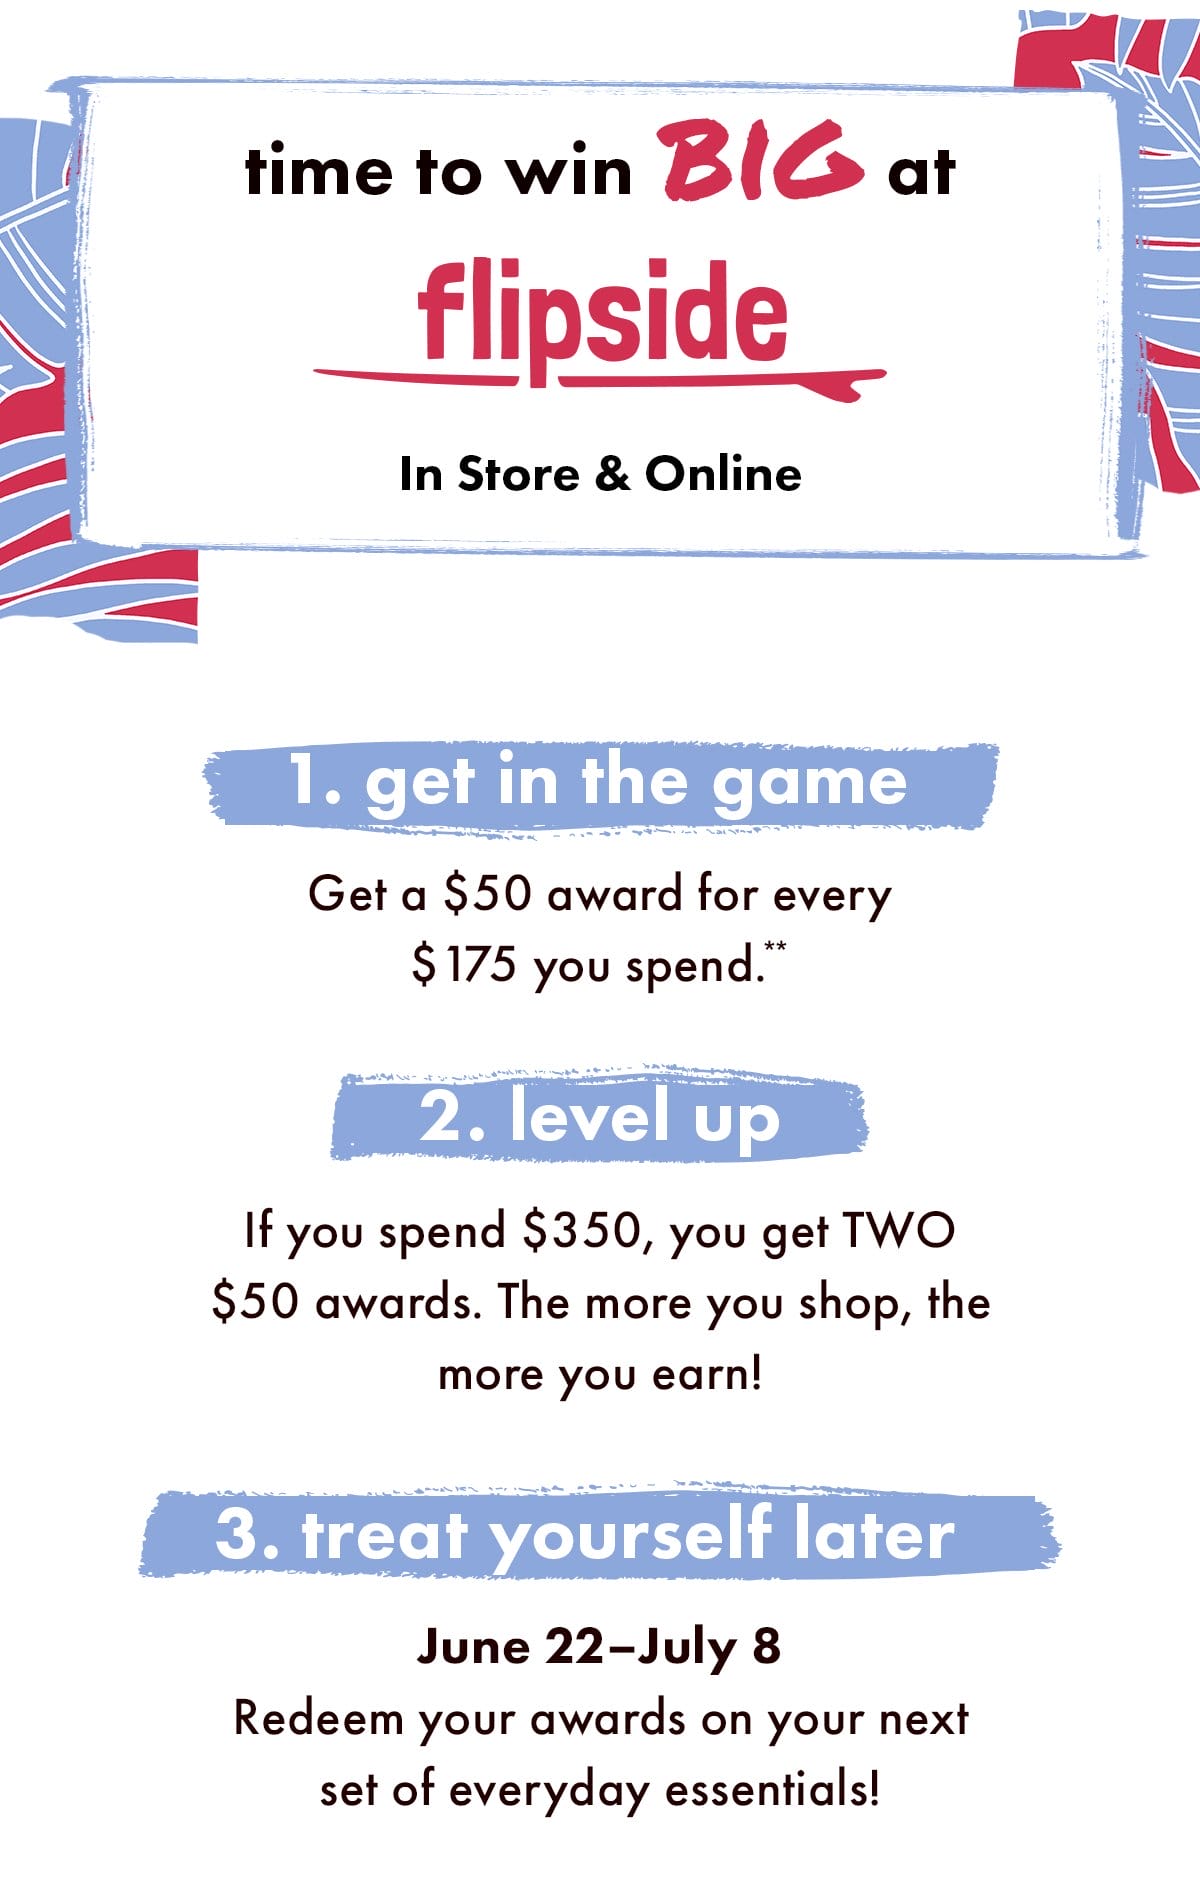 Time to win Big at Flipside In Store & Online. 1. Get in the game. Get a \\$50 award for every \\$175 you spend.** 2. Level up. If you spend \\$350, you get TWO \\$50 awards. The more you shop, the more you earn! 3. Treat yourself late. June 22 - July 8. Redeem your awards on your next set of everyday essentials!